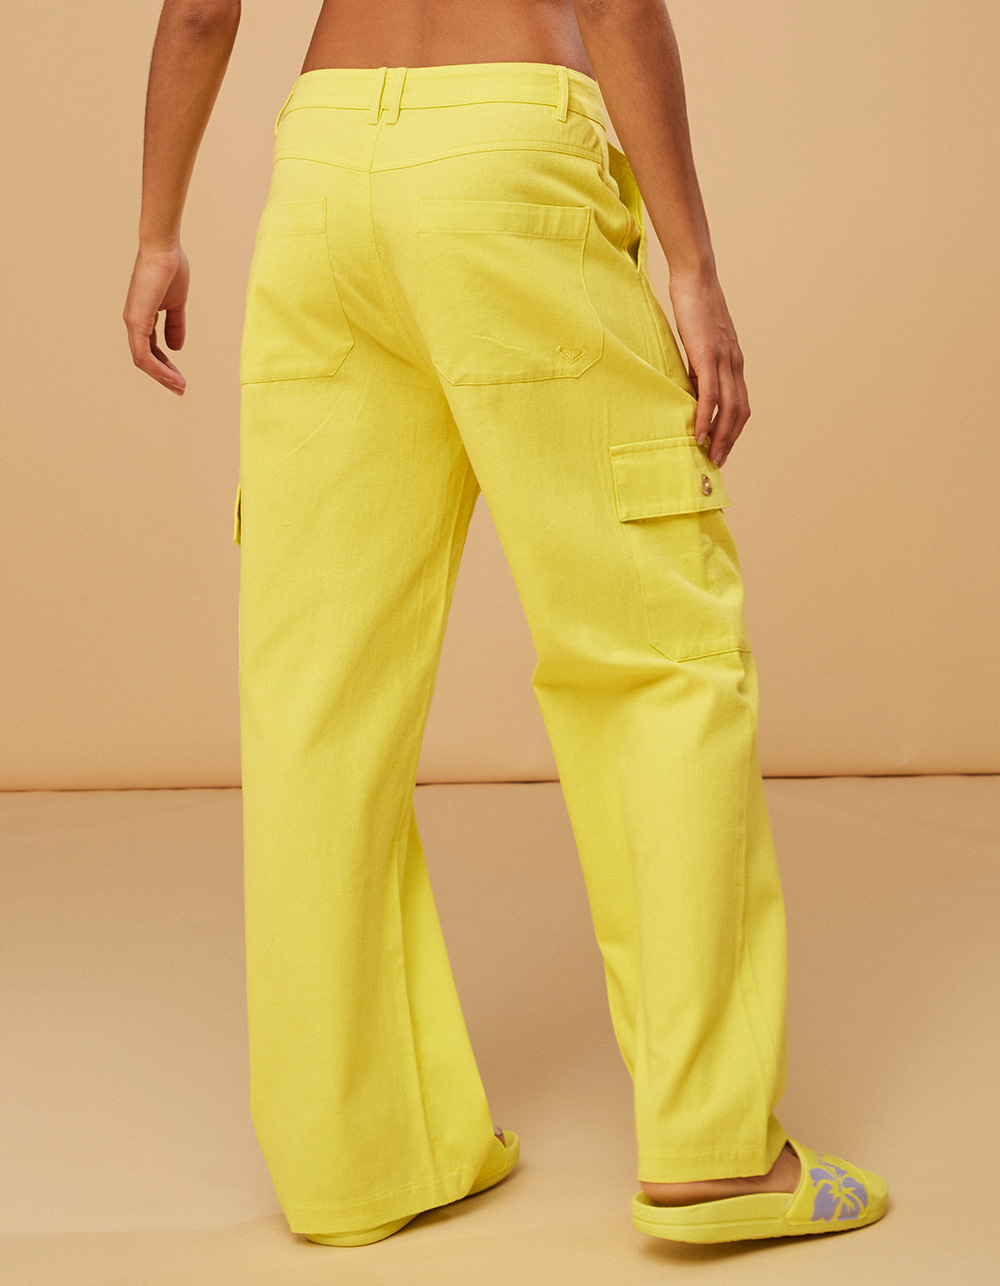 YELLOW | Surf Pants x Kate - ROXY Tillys Womens Kind Cargo Bosworth Kate